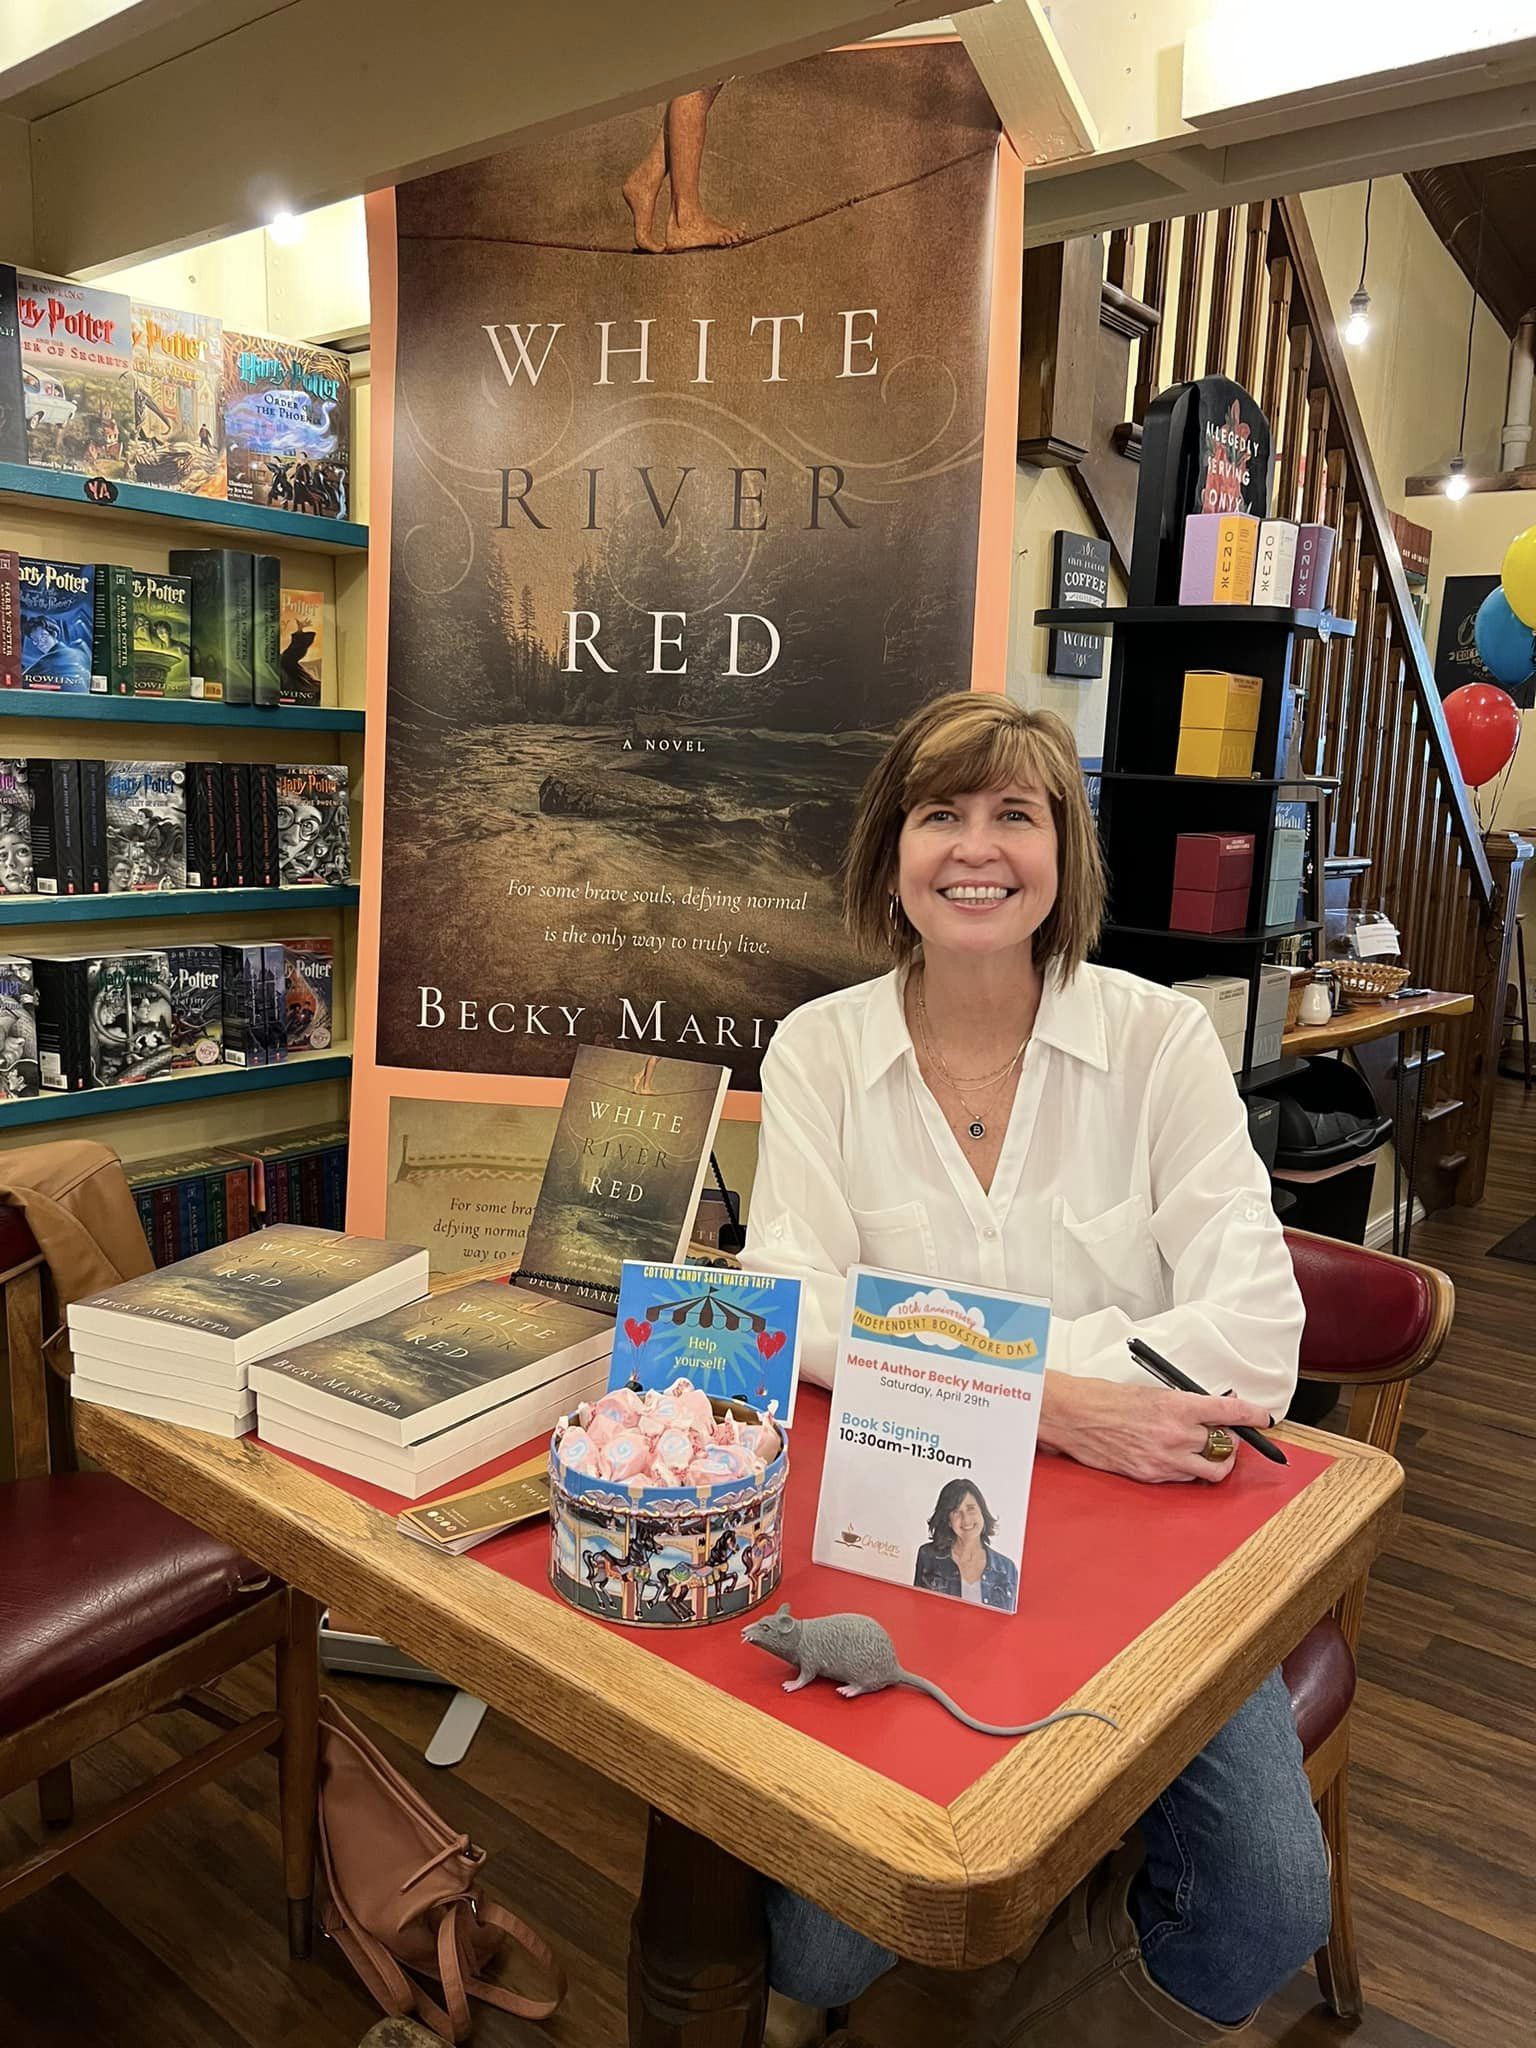 Woman in white shirt in front of book cover